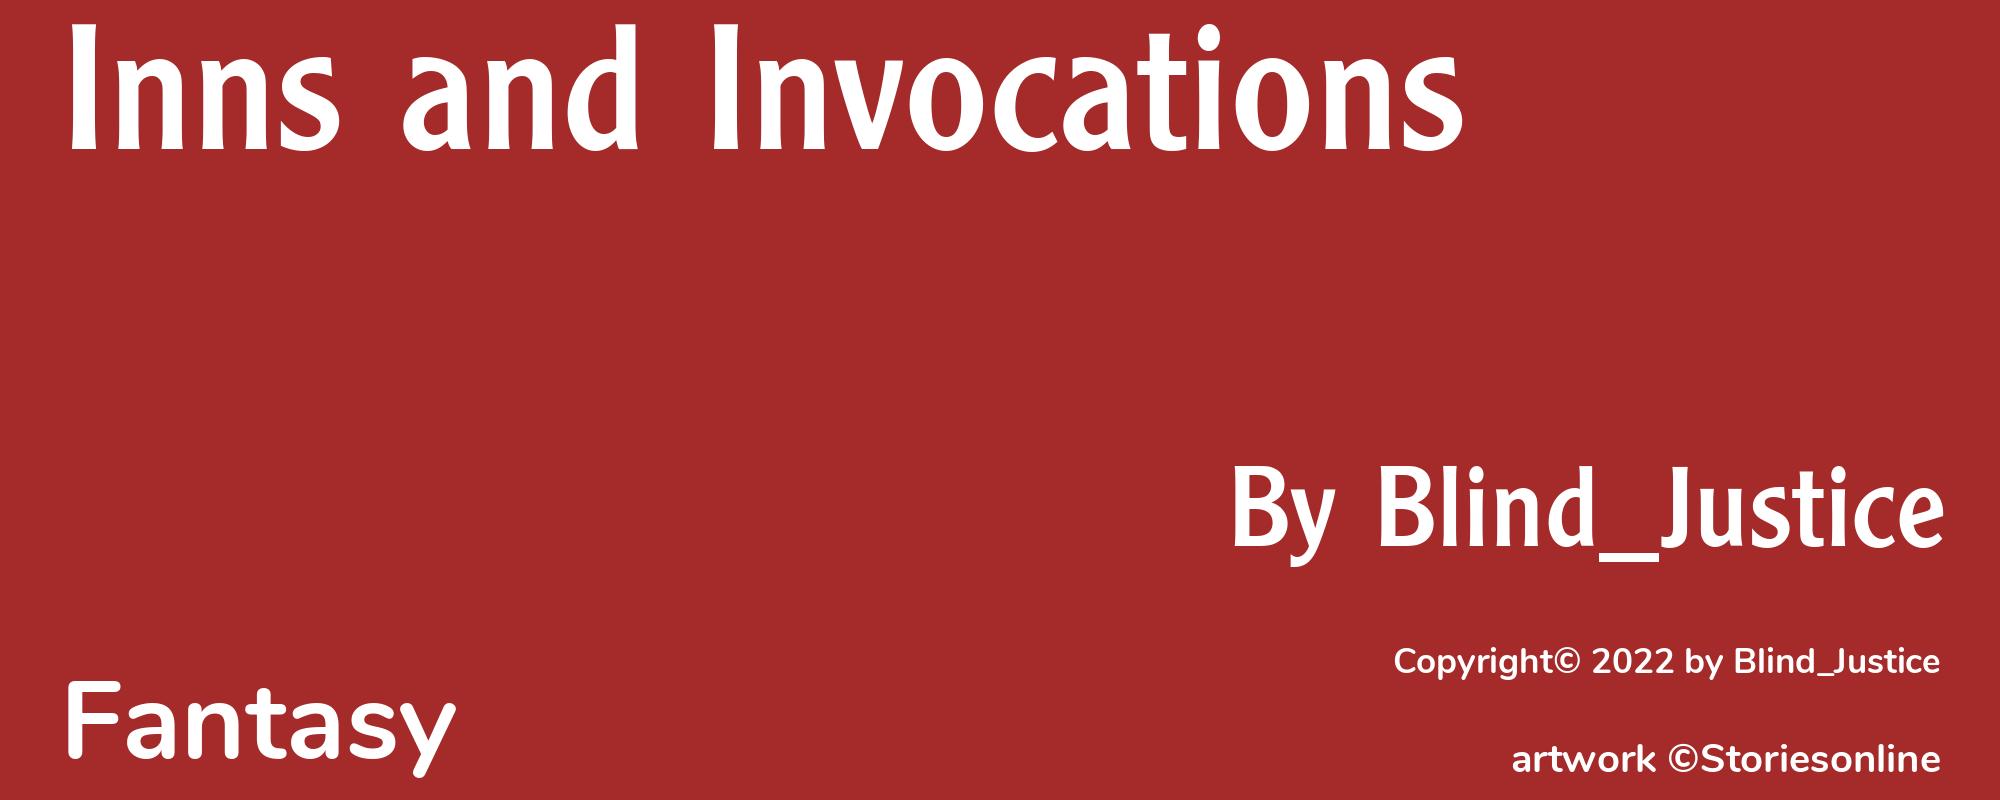 Inns and Invocations - Cover